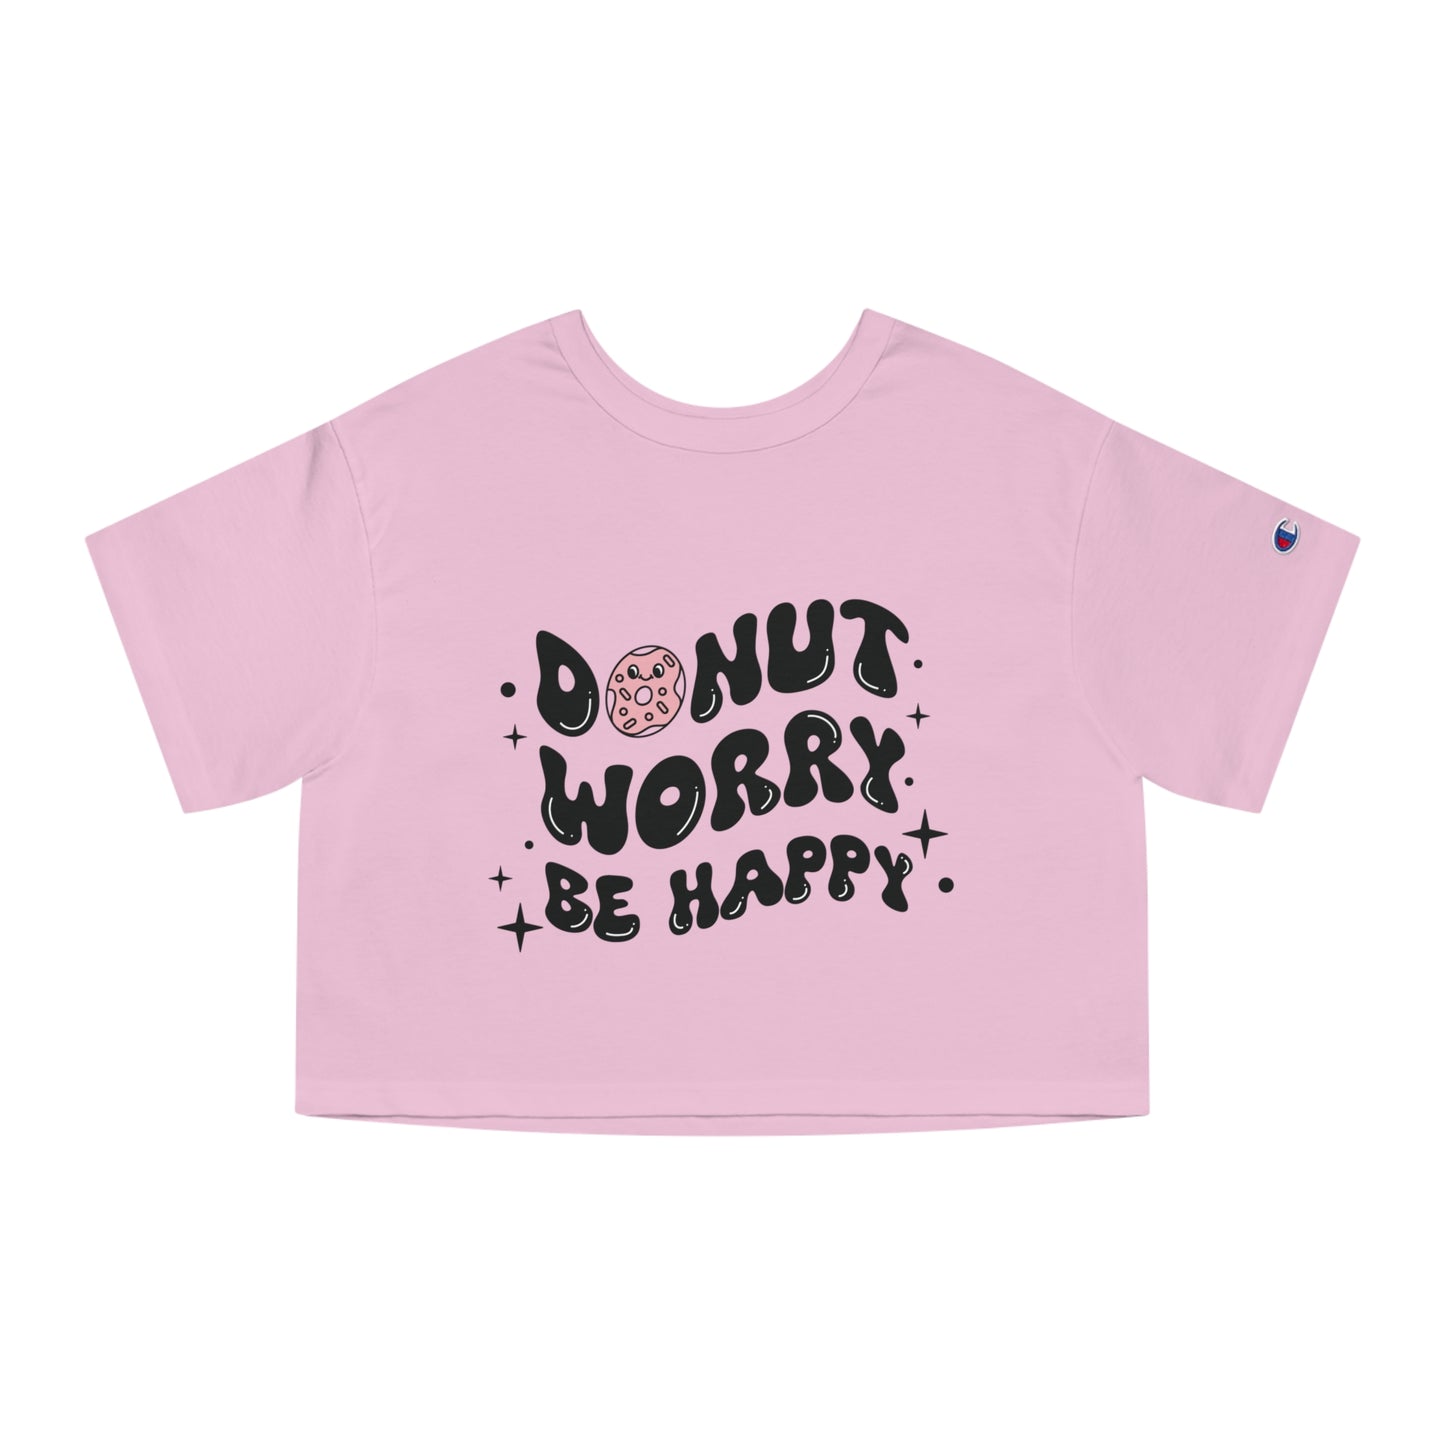 "Donut Worry Be Happy" Champion Women's Heritage Cropped T-Shirt